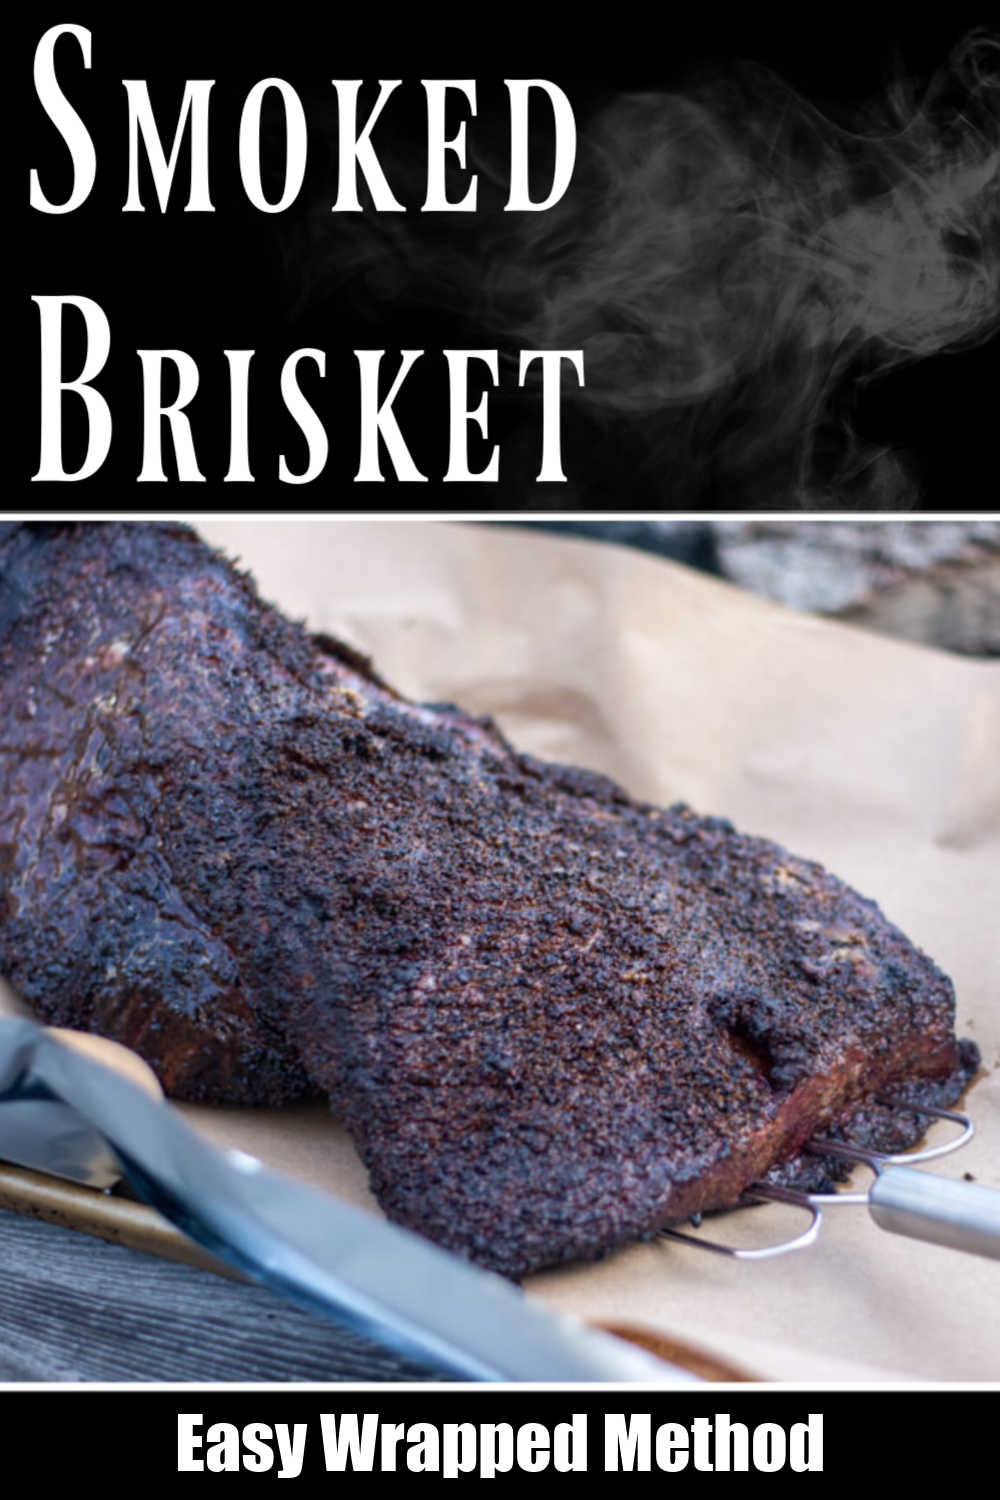 Super Easy Smoked Brisket Recipe Using the Wrapped Method